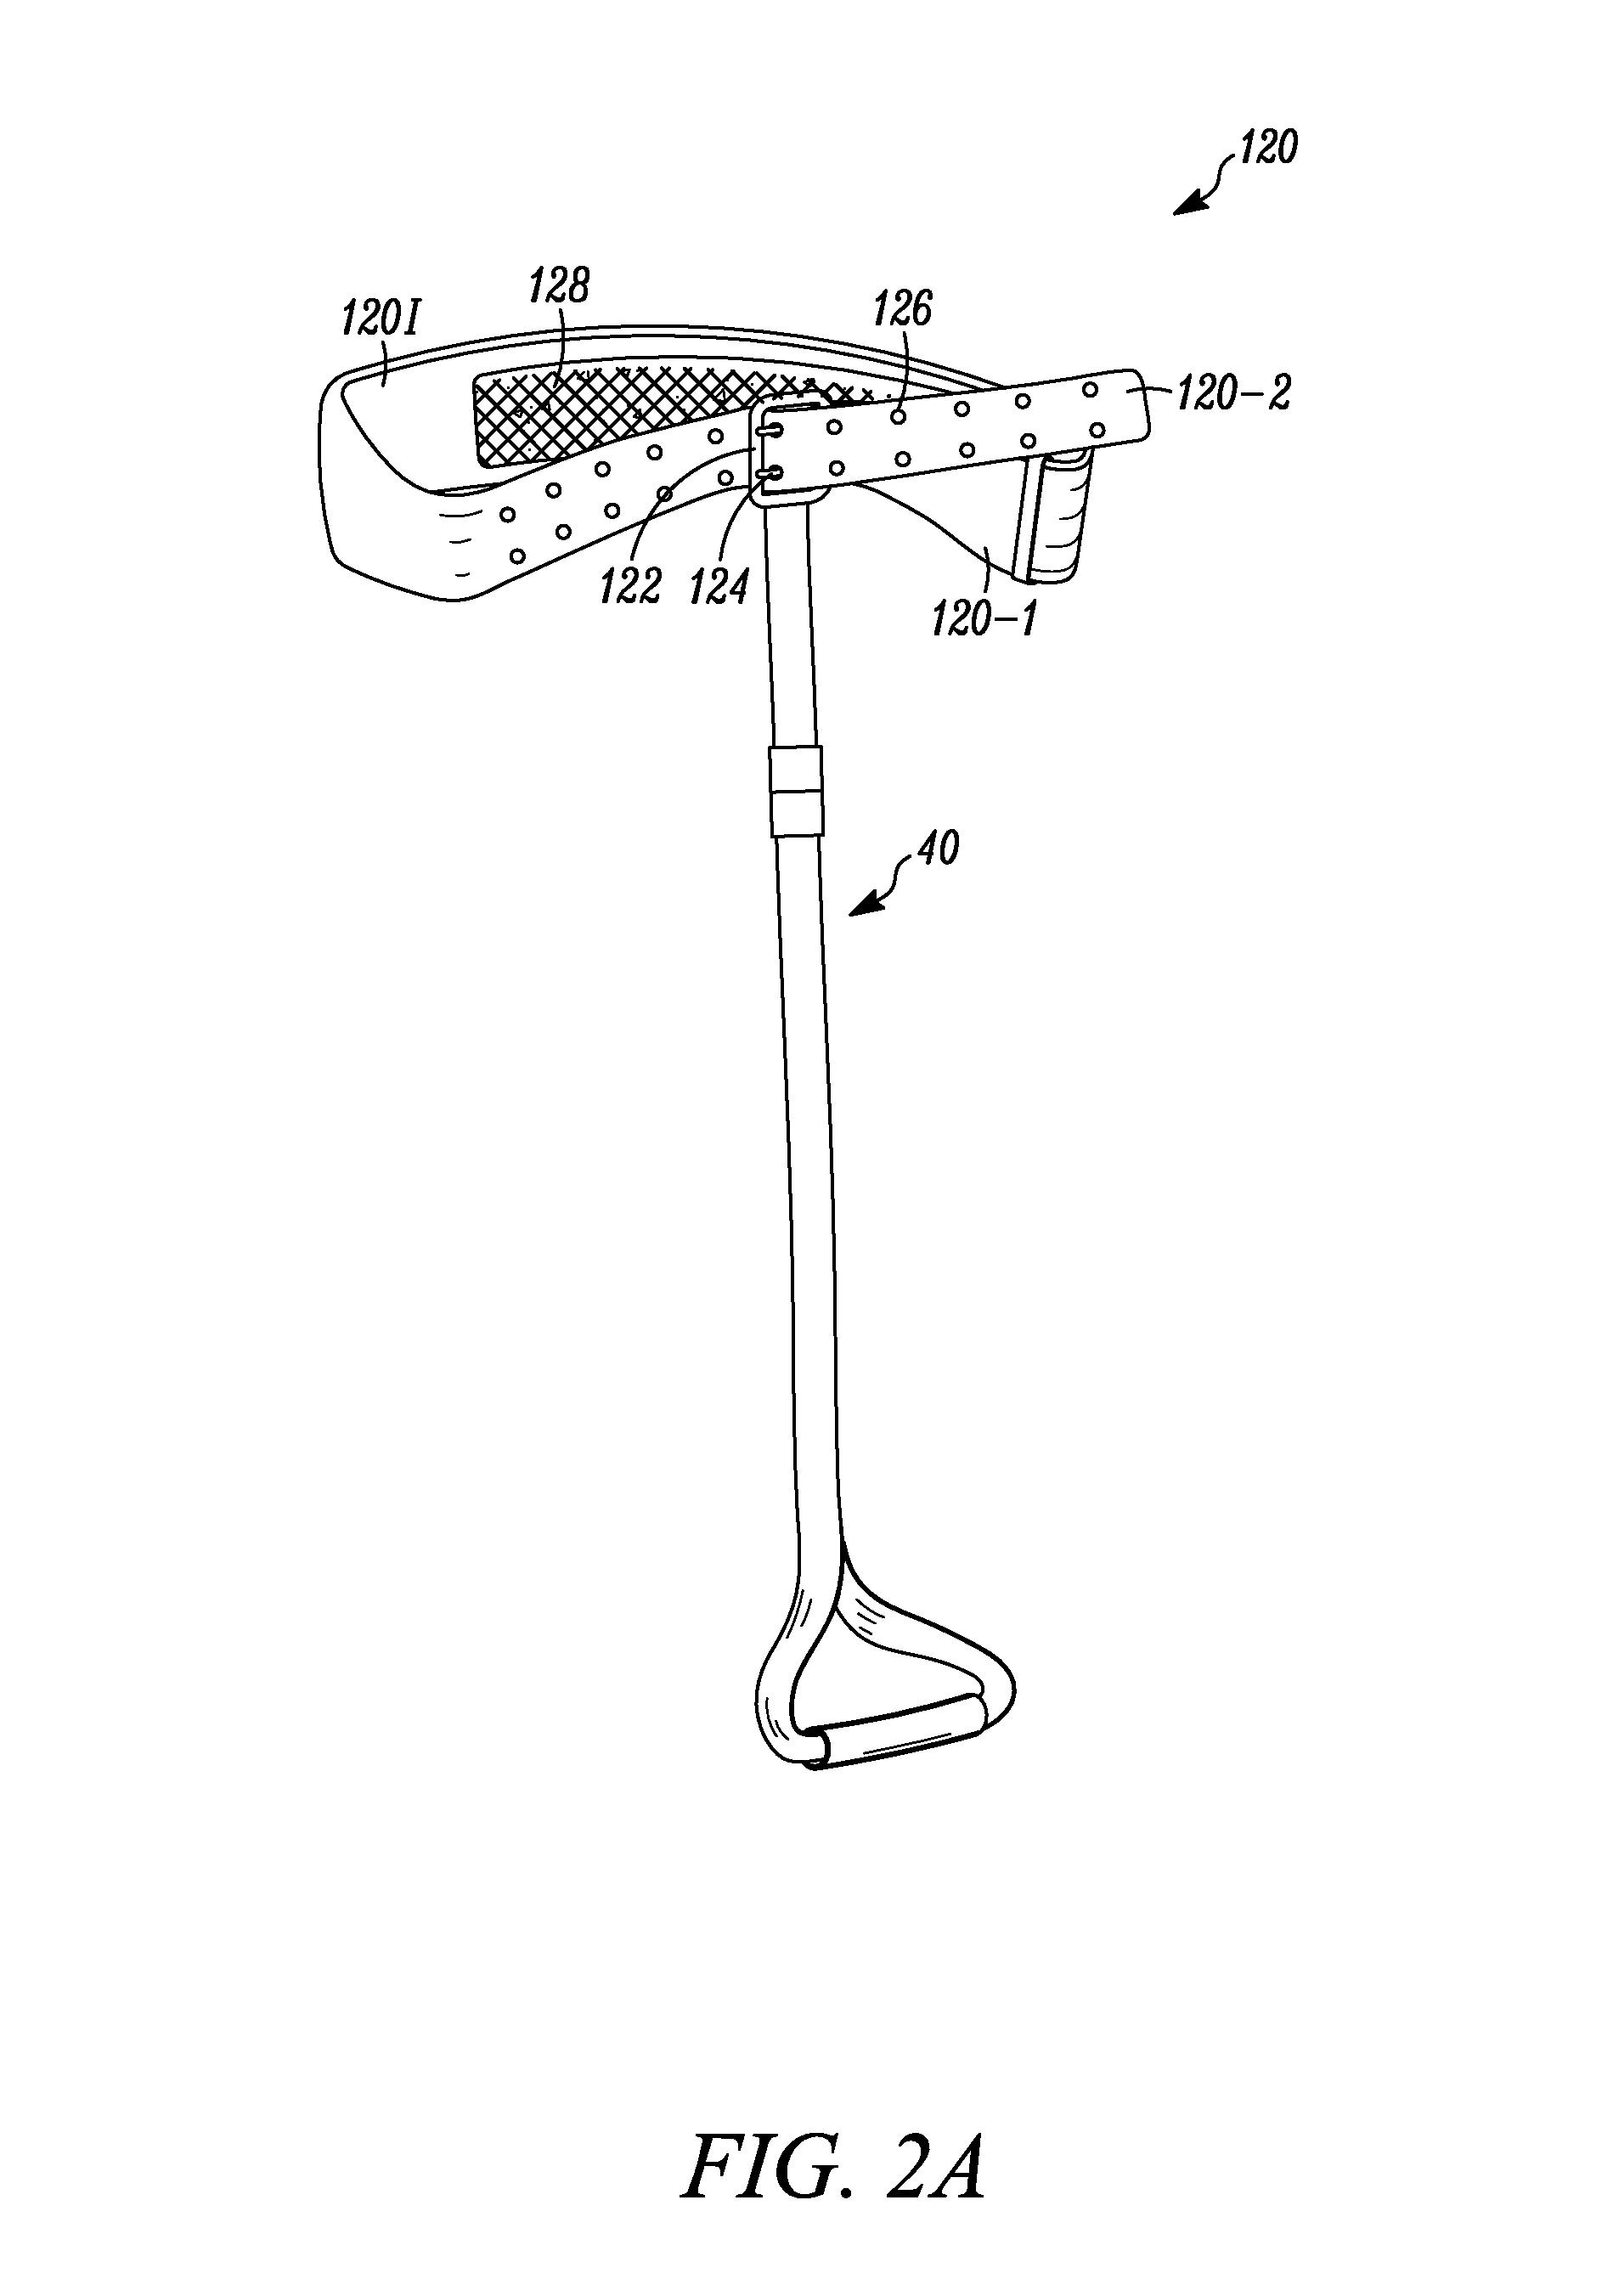 Spinal therapy device